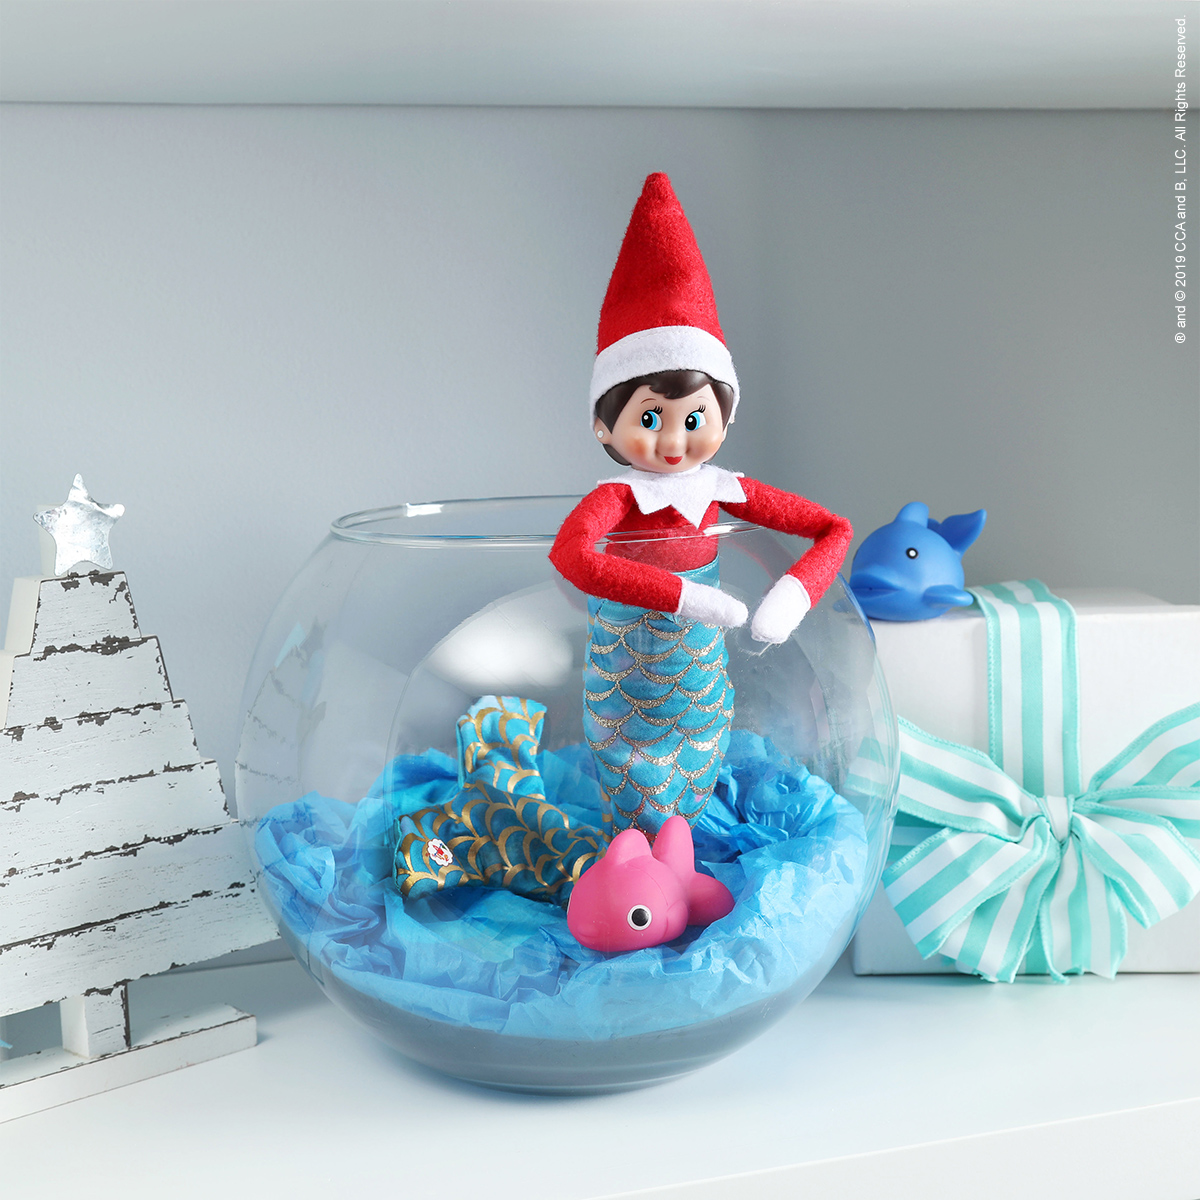 Under the Sea | The Elf on the Shelf